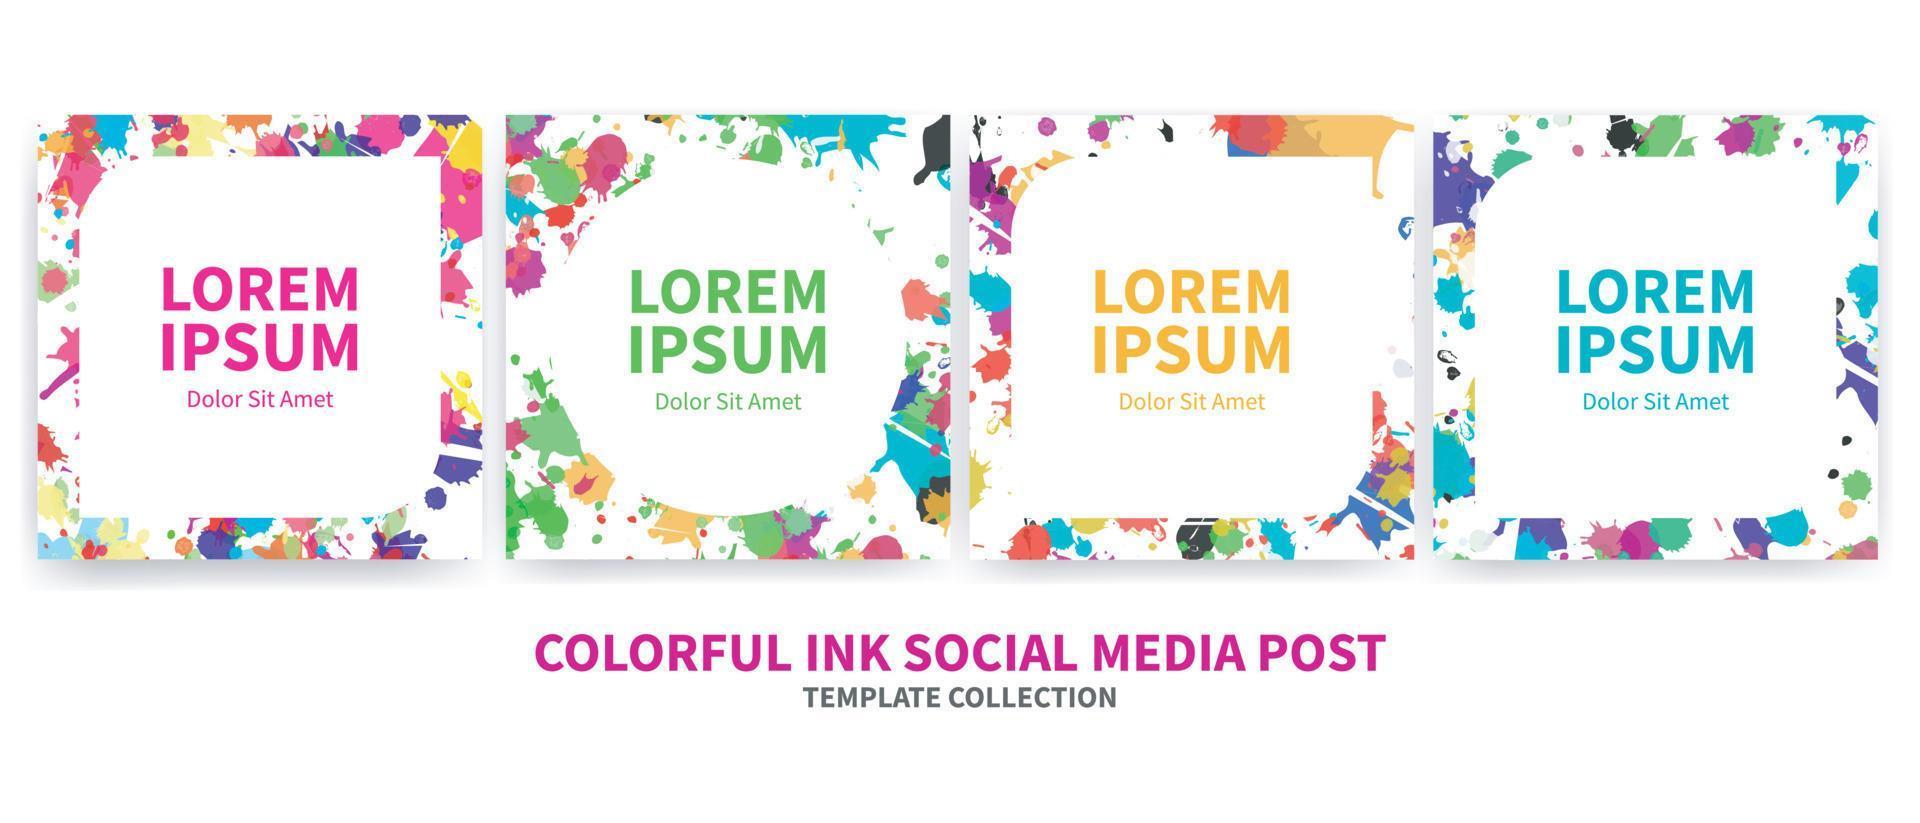 Social media post template with colorful ink vector